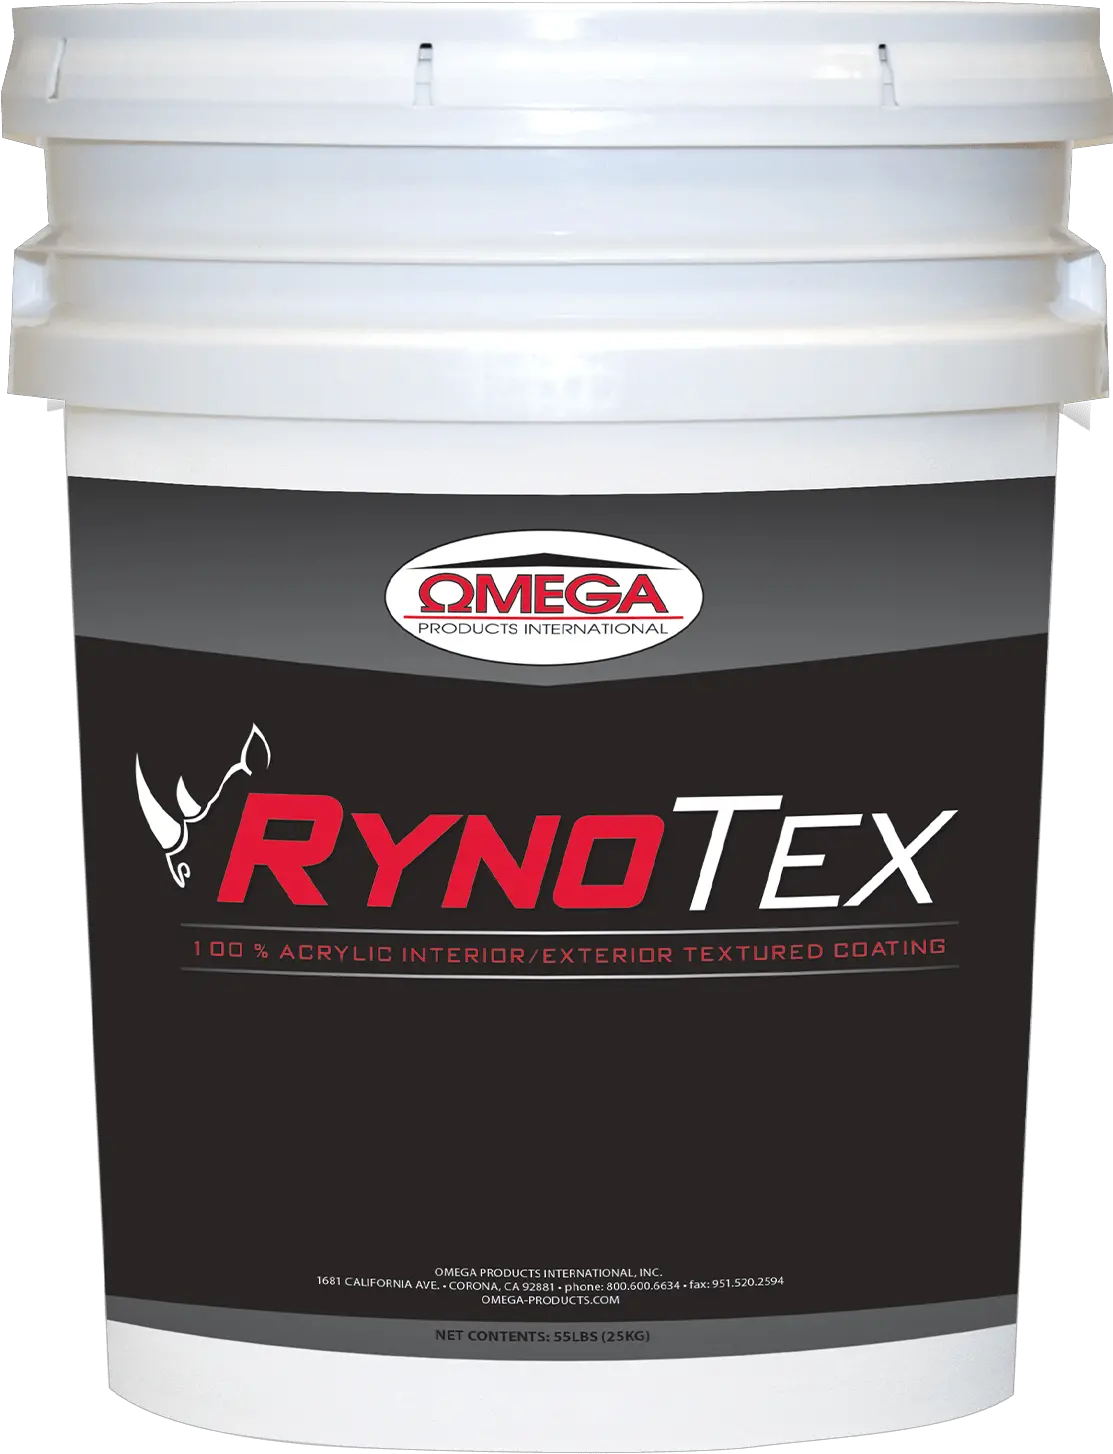 Rynotex Omega Products International Bottle Png Crack Texture Png